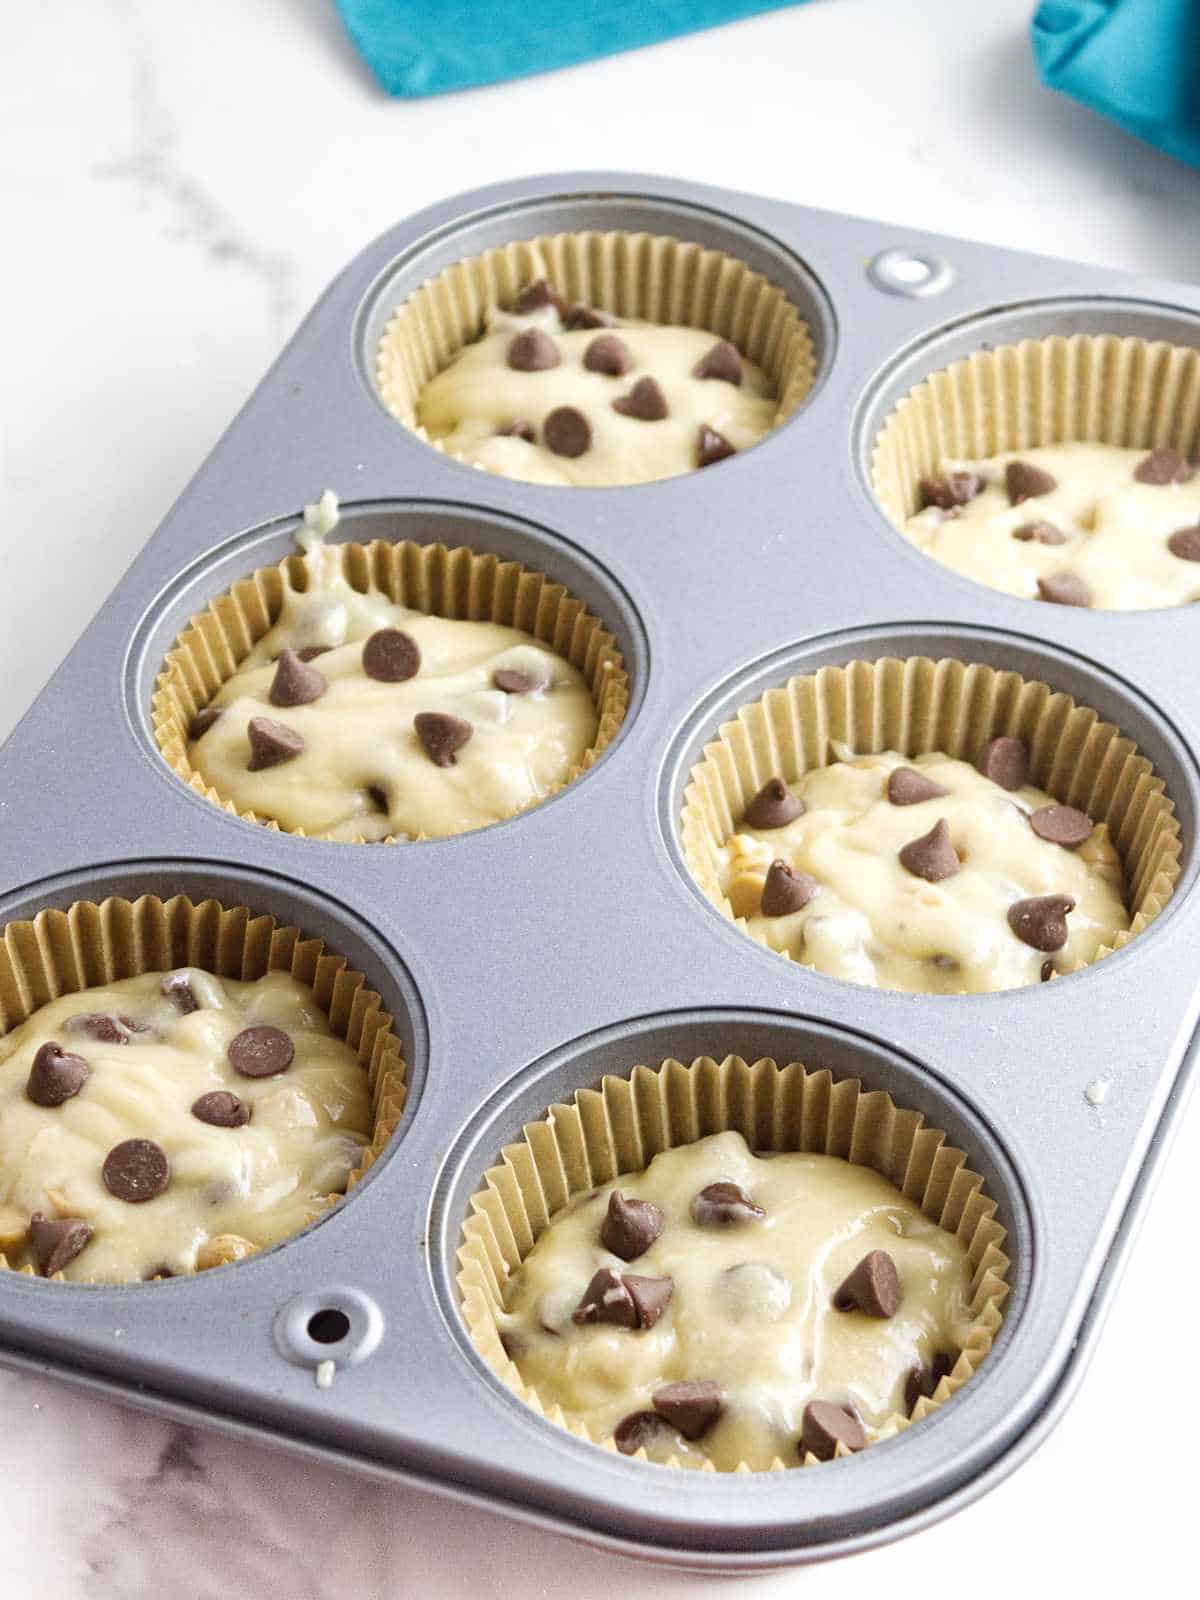 Jumbo muffin tins filled with chocolate chip muffin batter.